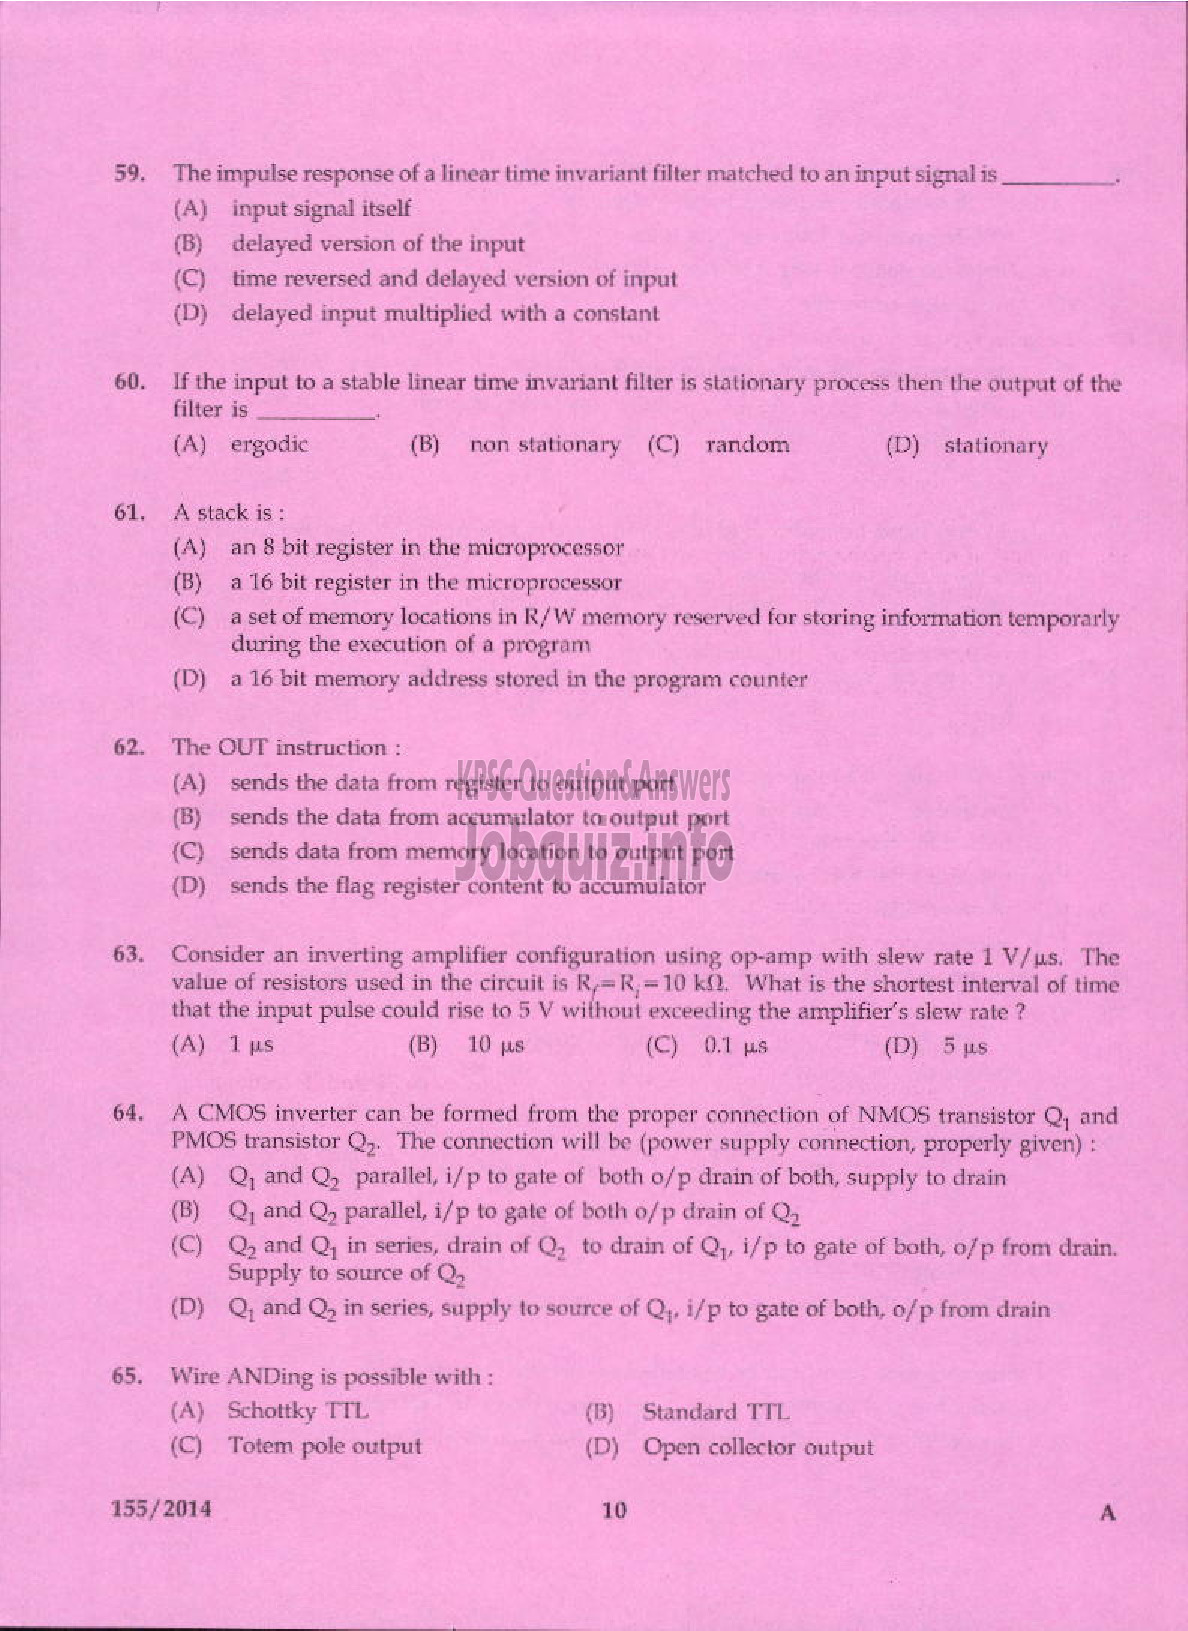 Kerala PSC Question Paper - INSTRUCTOR GR I ELECTRONICS ENGINEERING COLLEGES TECHNICAL EDUCATION-8